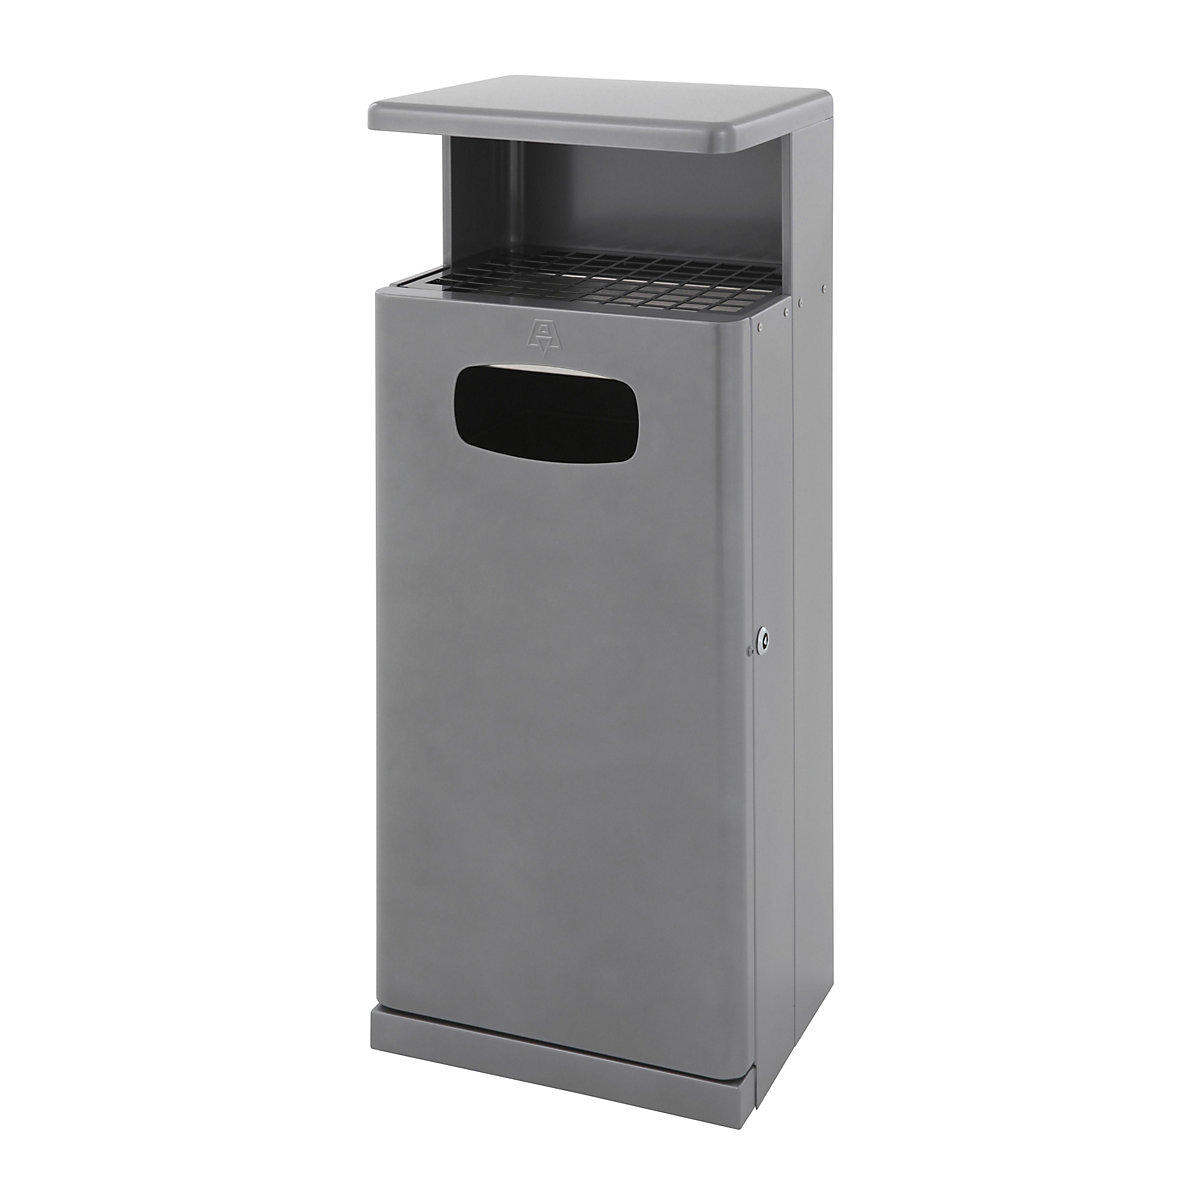 Waste collector with ashtray hood, aluminium, capacity 55 l, WxHxD 345 x 1030 x 400 mm, charcoal-3